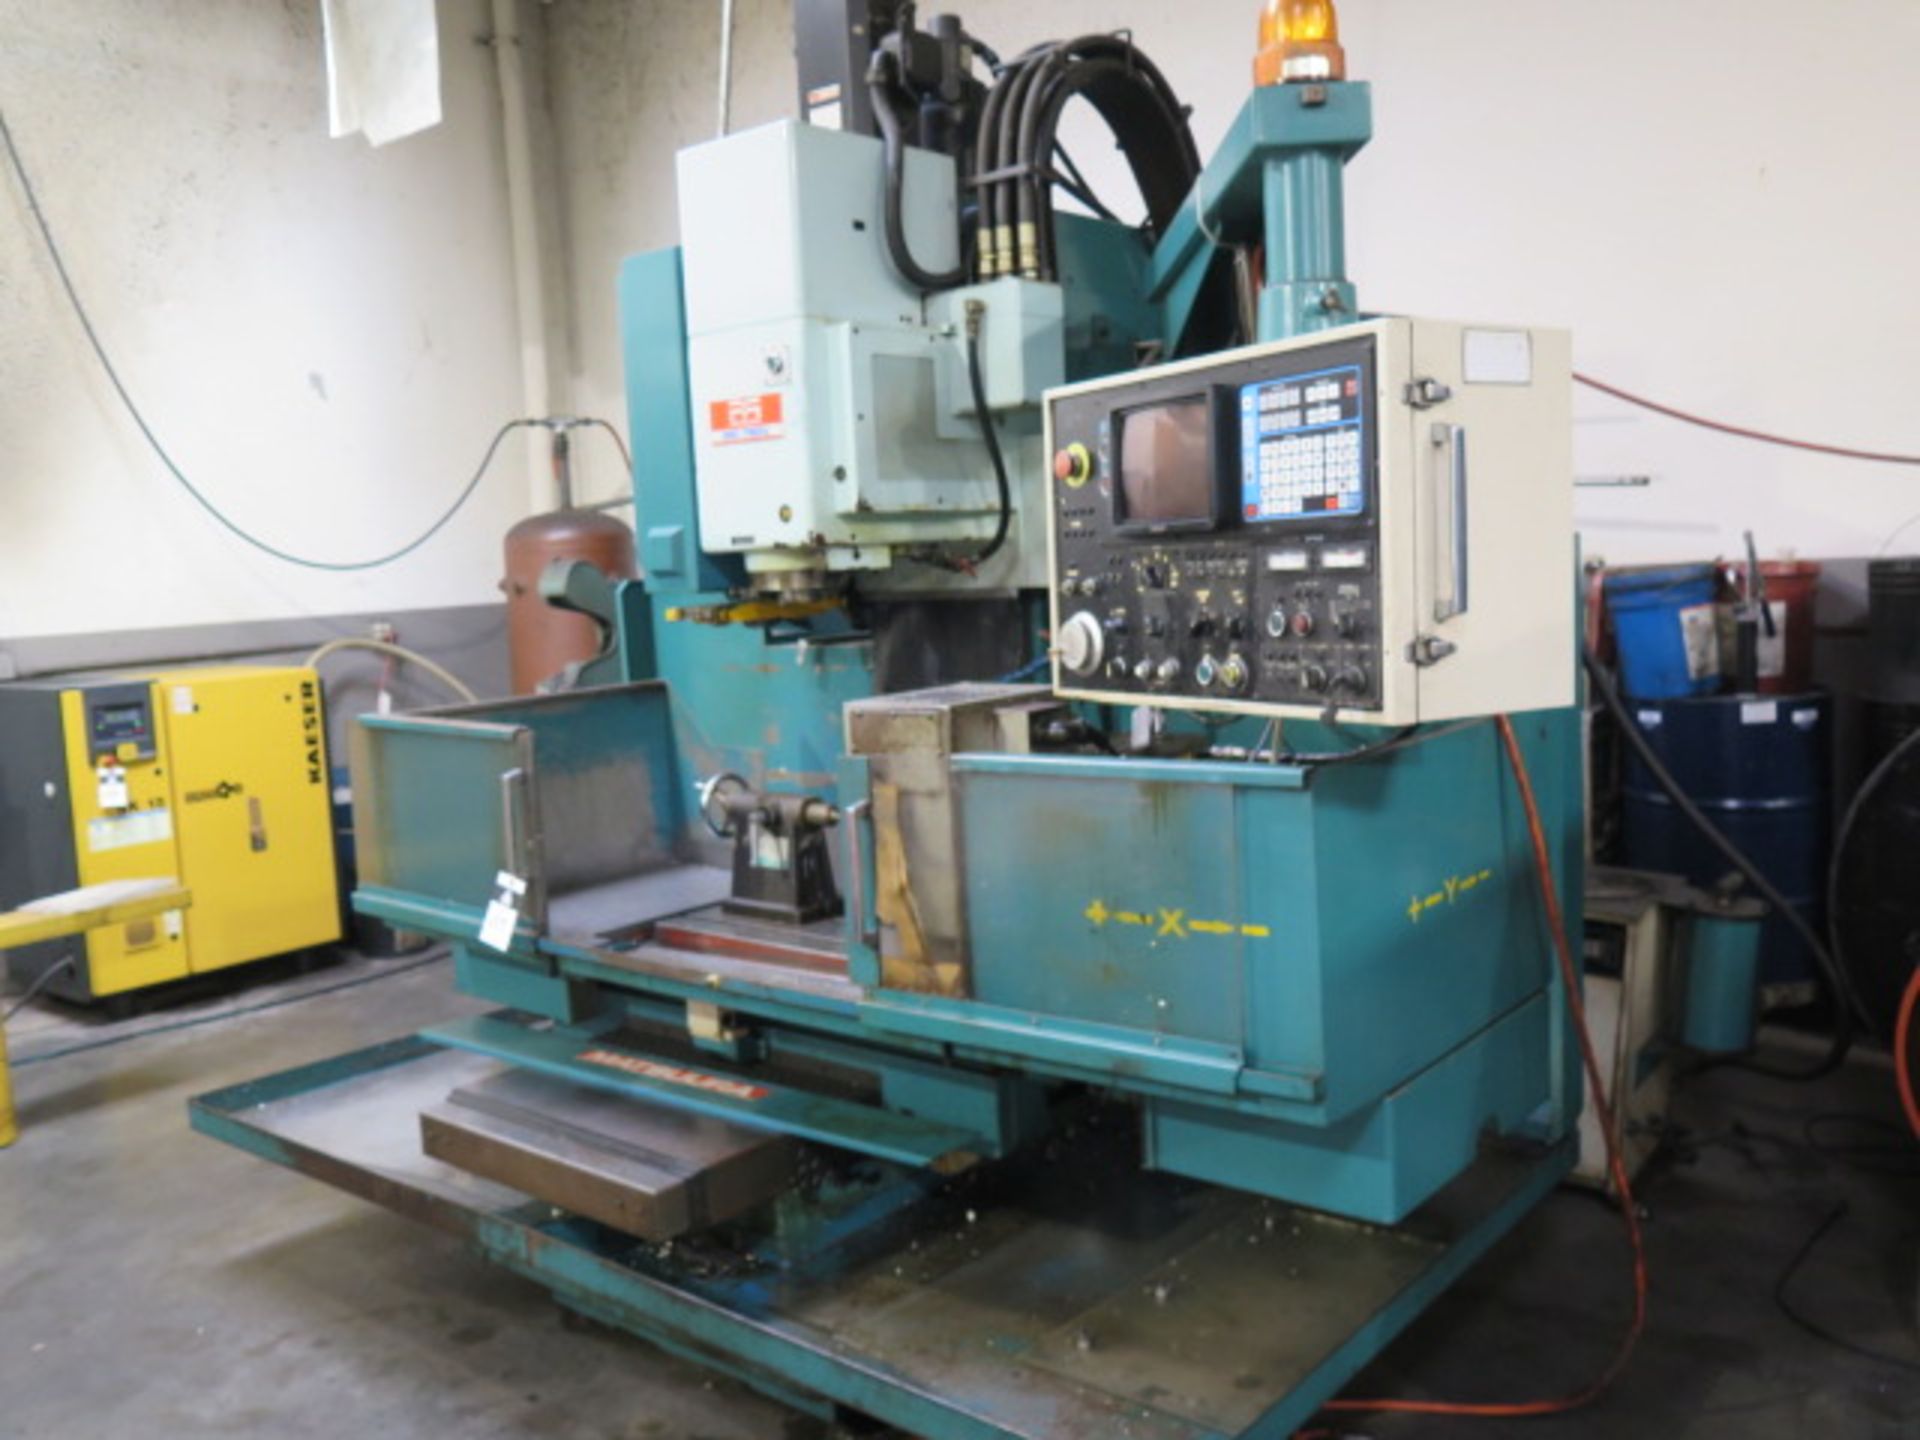 Matsuura MC-760V2 4-Axis CNC VMC s/n 85044778 w/ Yasnac MX2 Controls, SOLD AS IS - Image 2 of 9